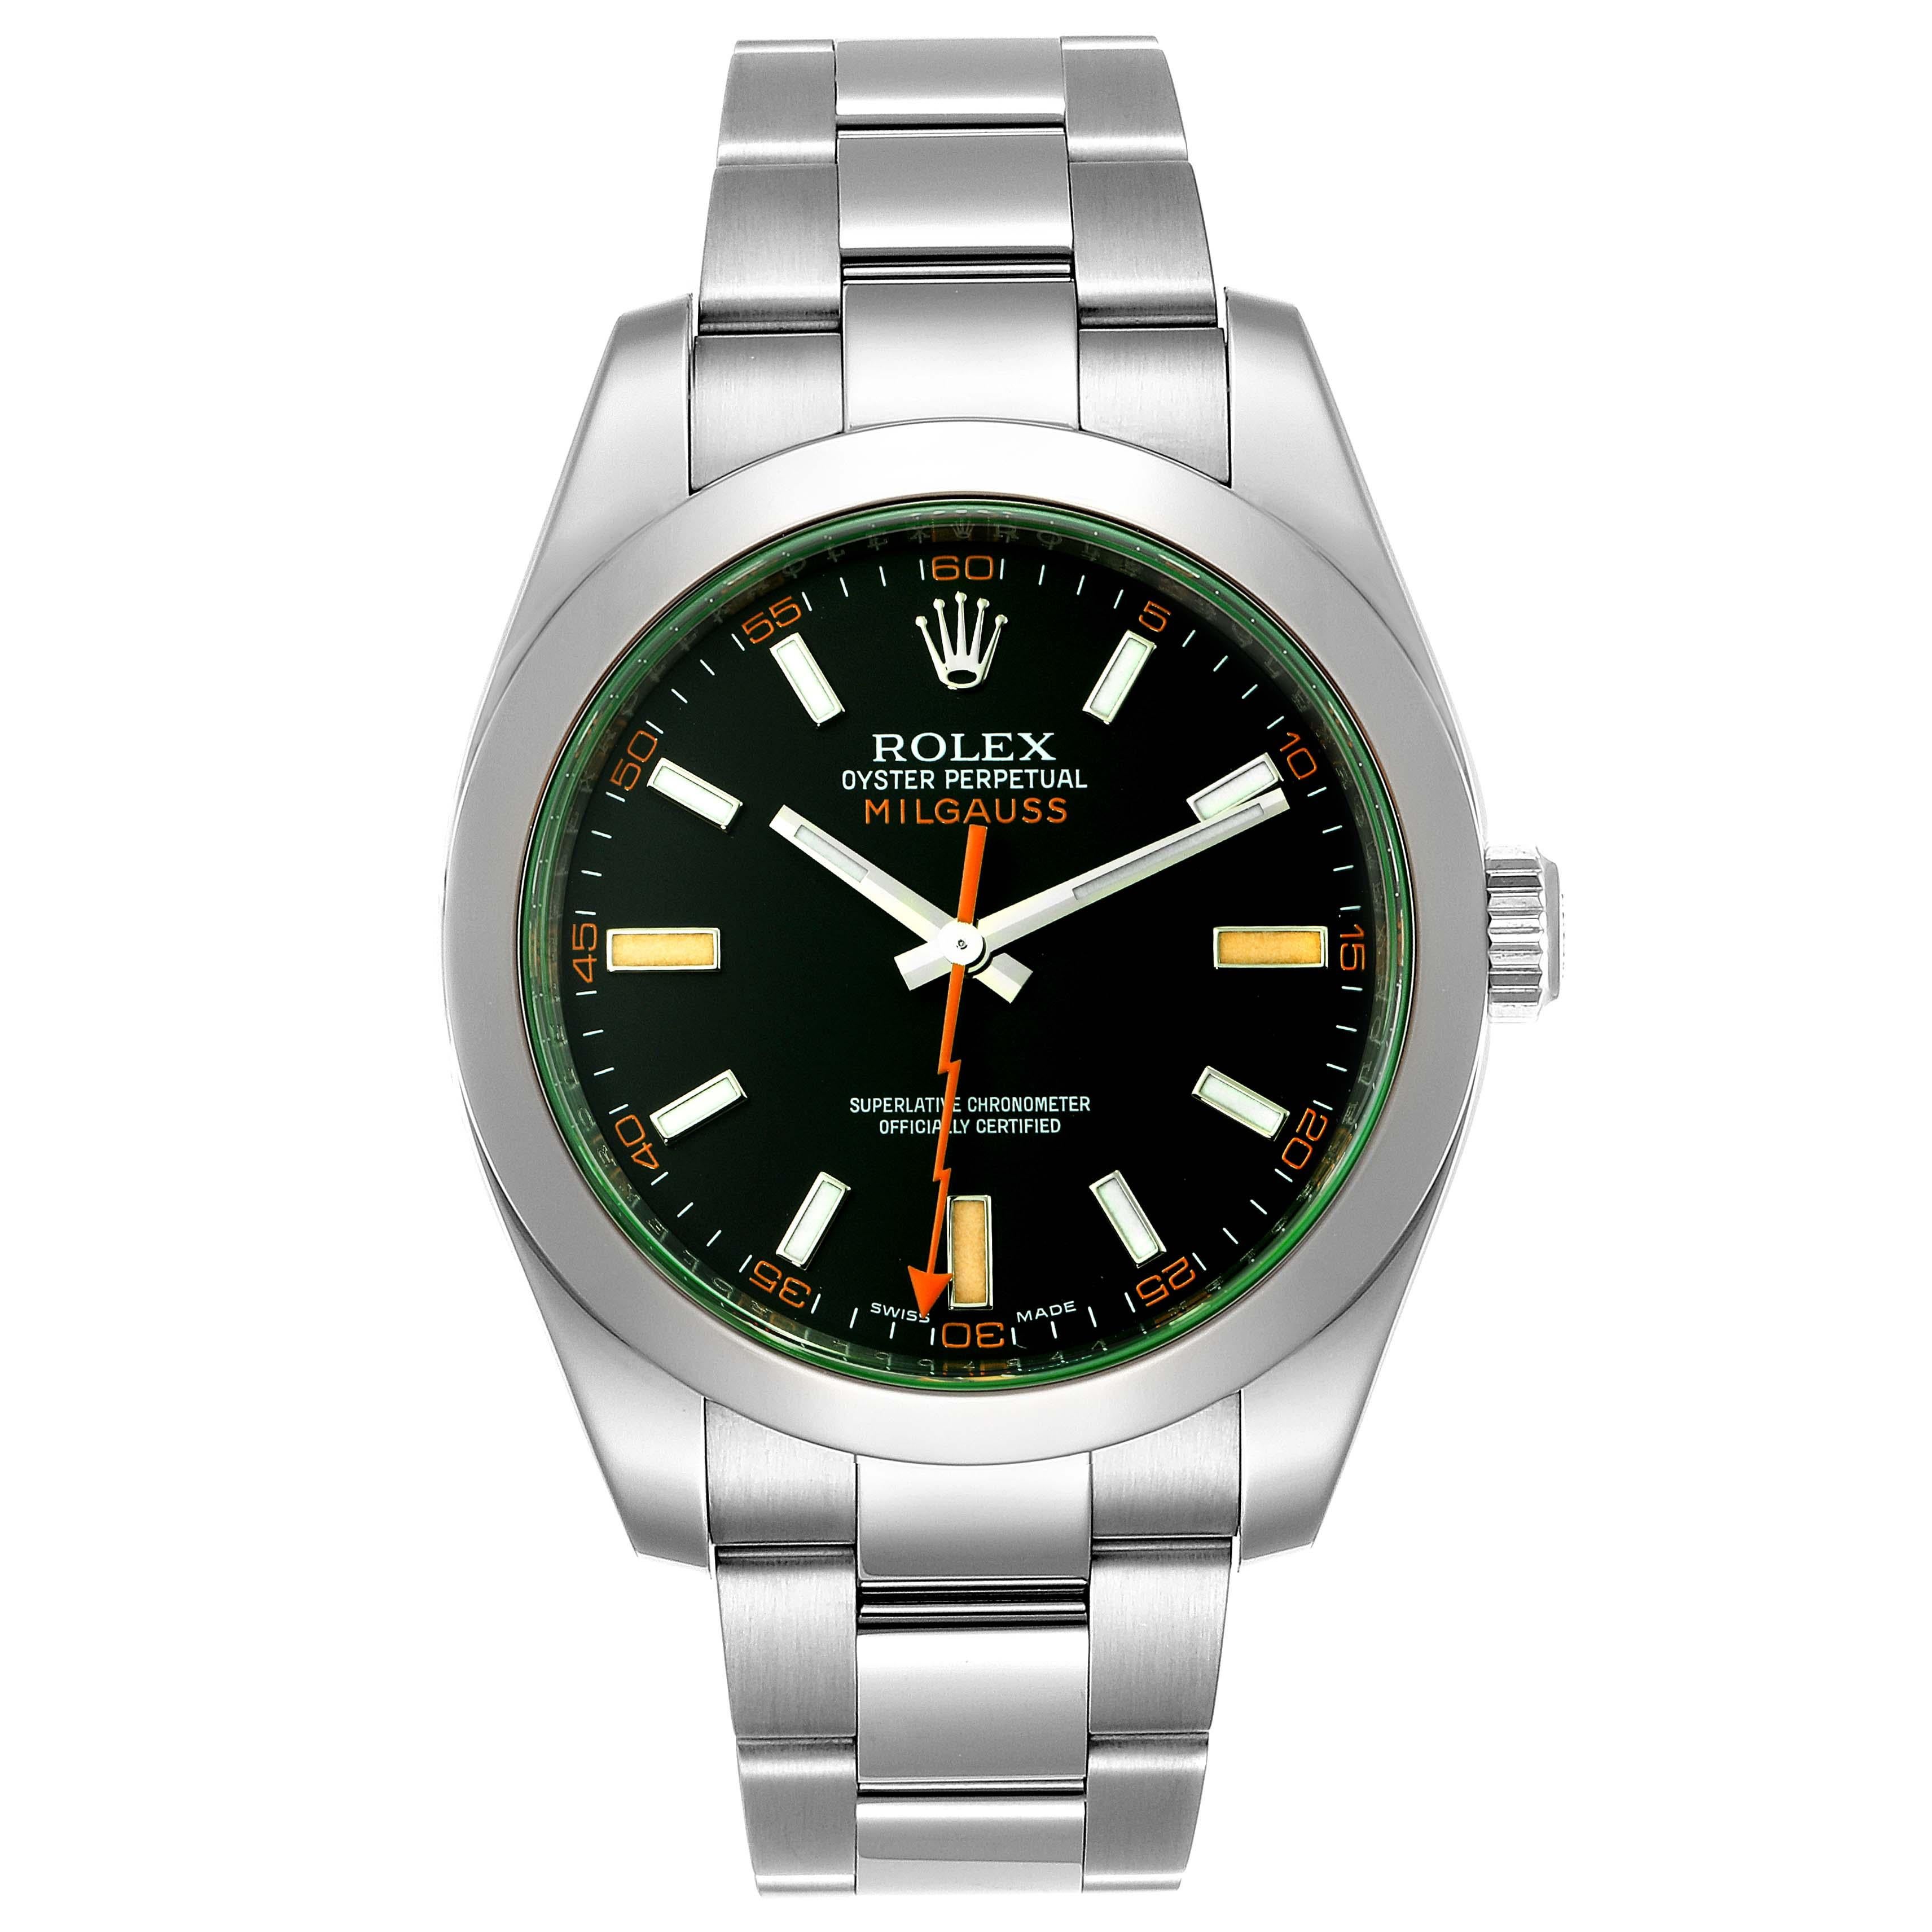 Rolex Milgauss Blue Dial Green Crystal Steel Mens Watch 116400V. Officially certified chronometer self-winding movement. Stainless steel case 40.0 mm in diameter. Stainless steel fixed smooth domed bezel. Scratch resistant green sapphire crystal.